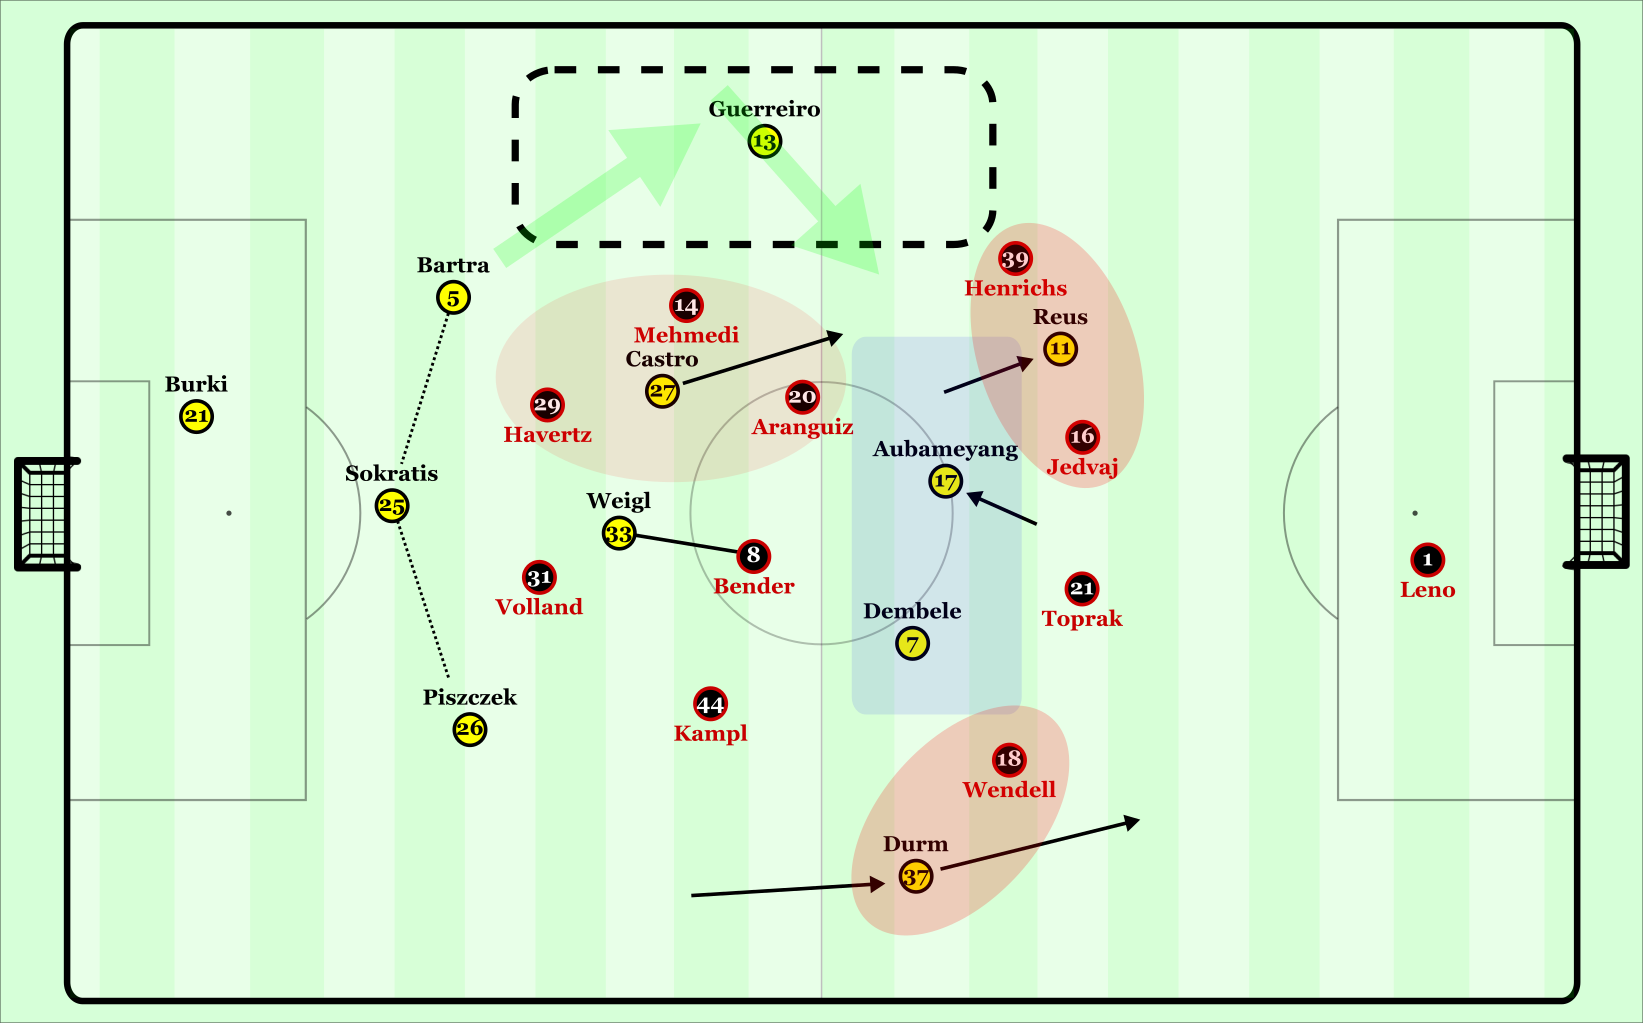 Dortmund occupied Bayer's defensive line well, which aided the possession in deeper areas.